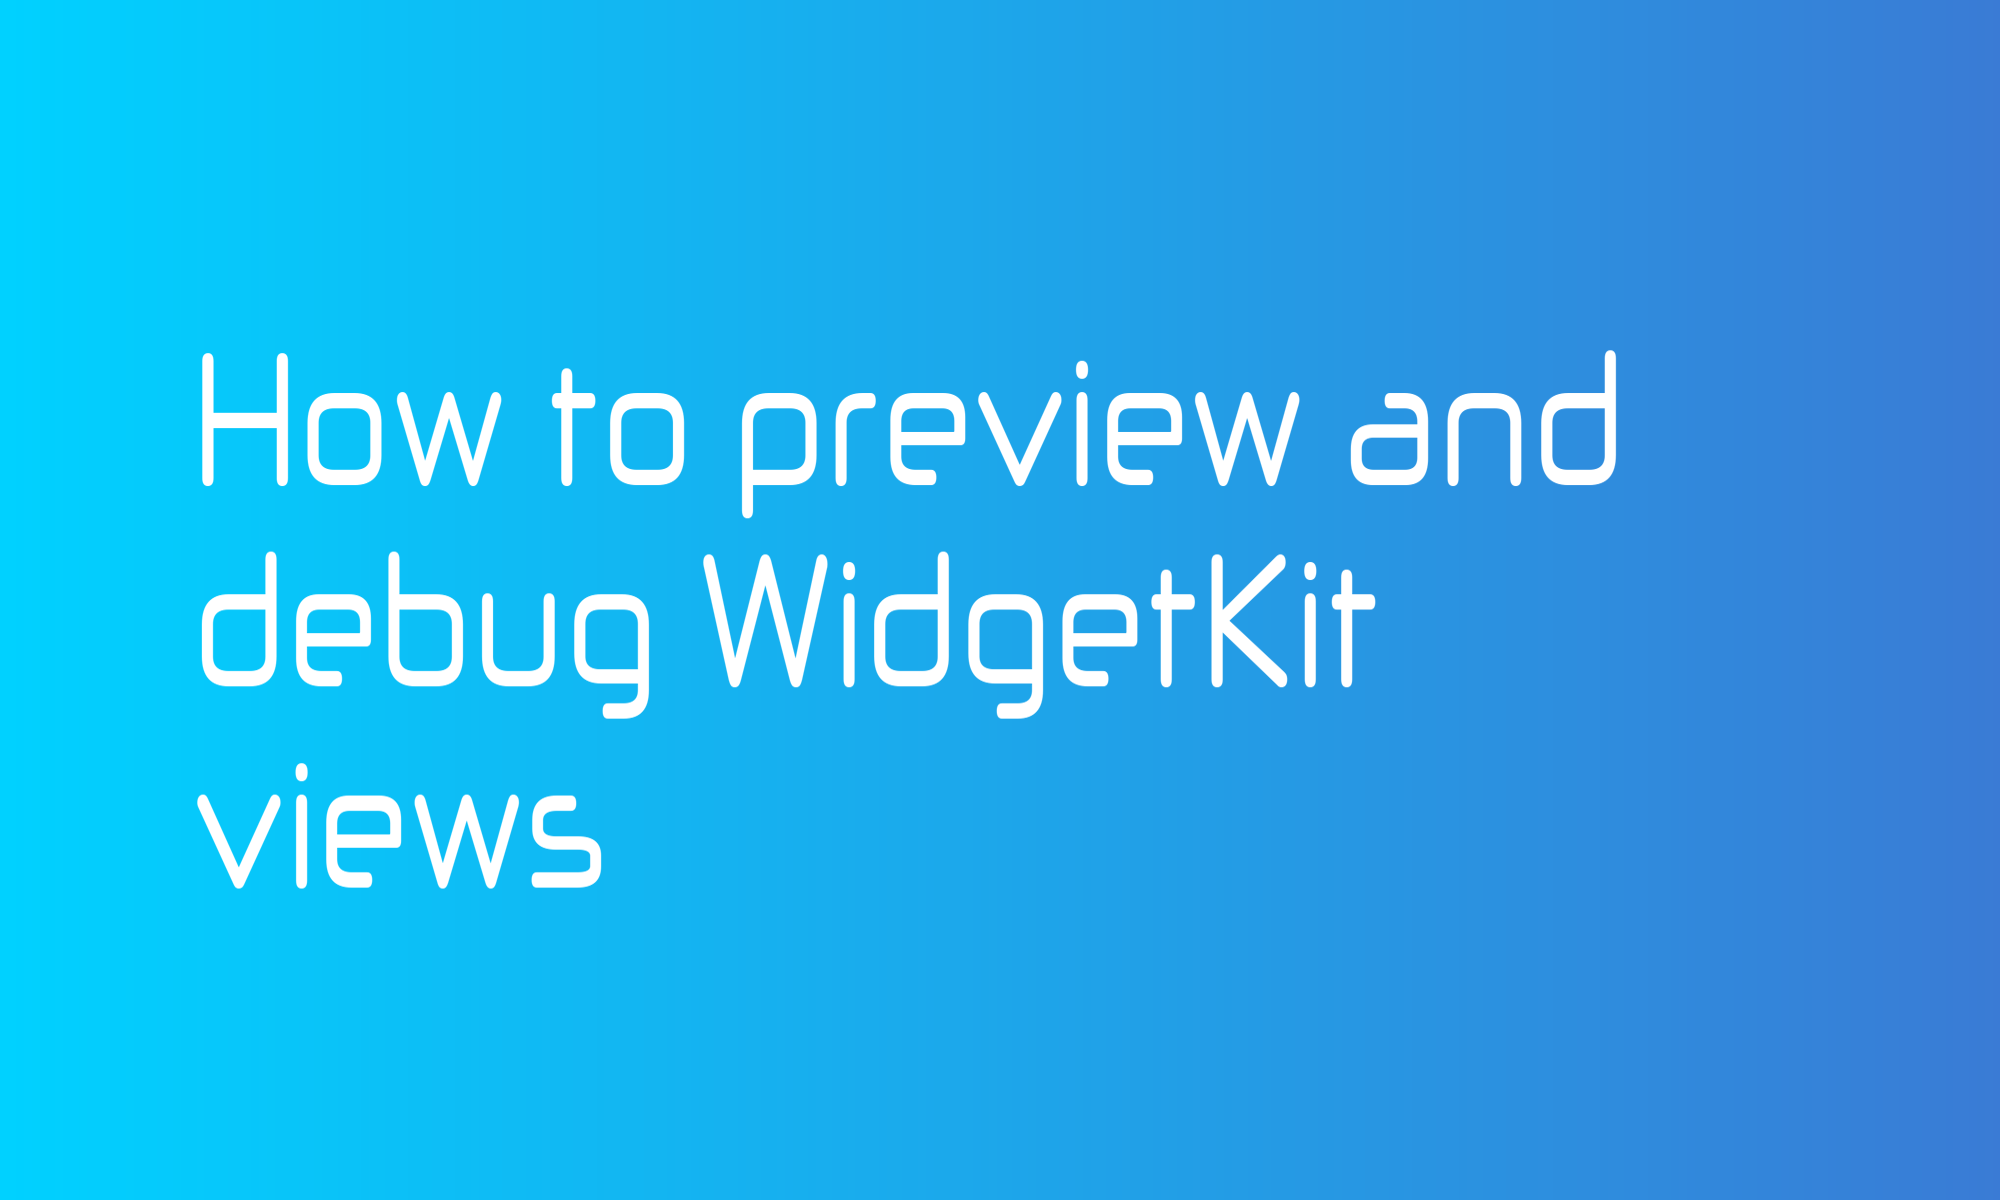 How to preview and debug WidgetKit views